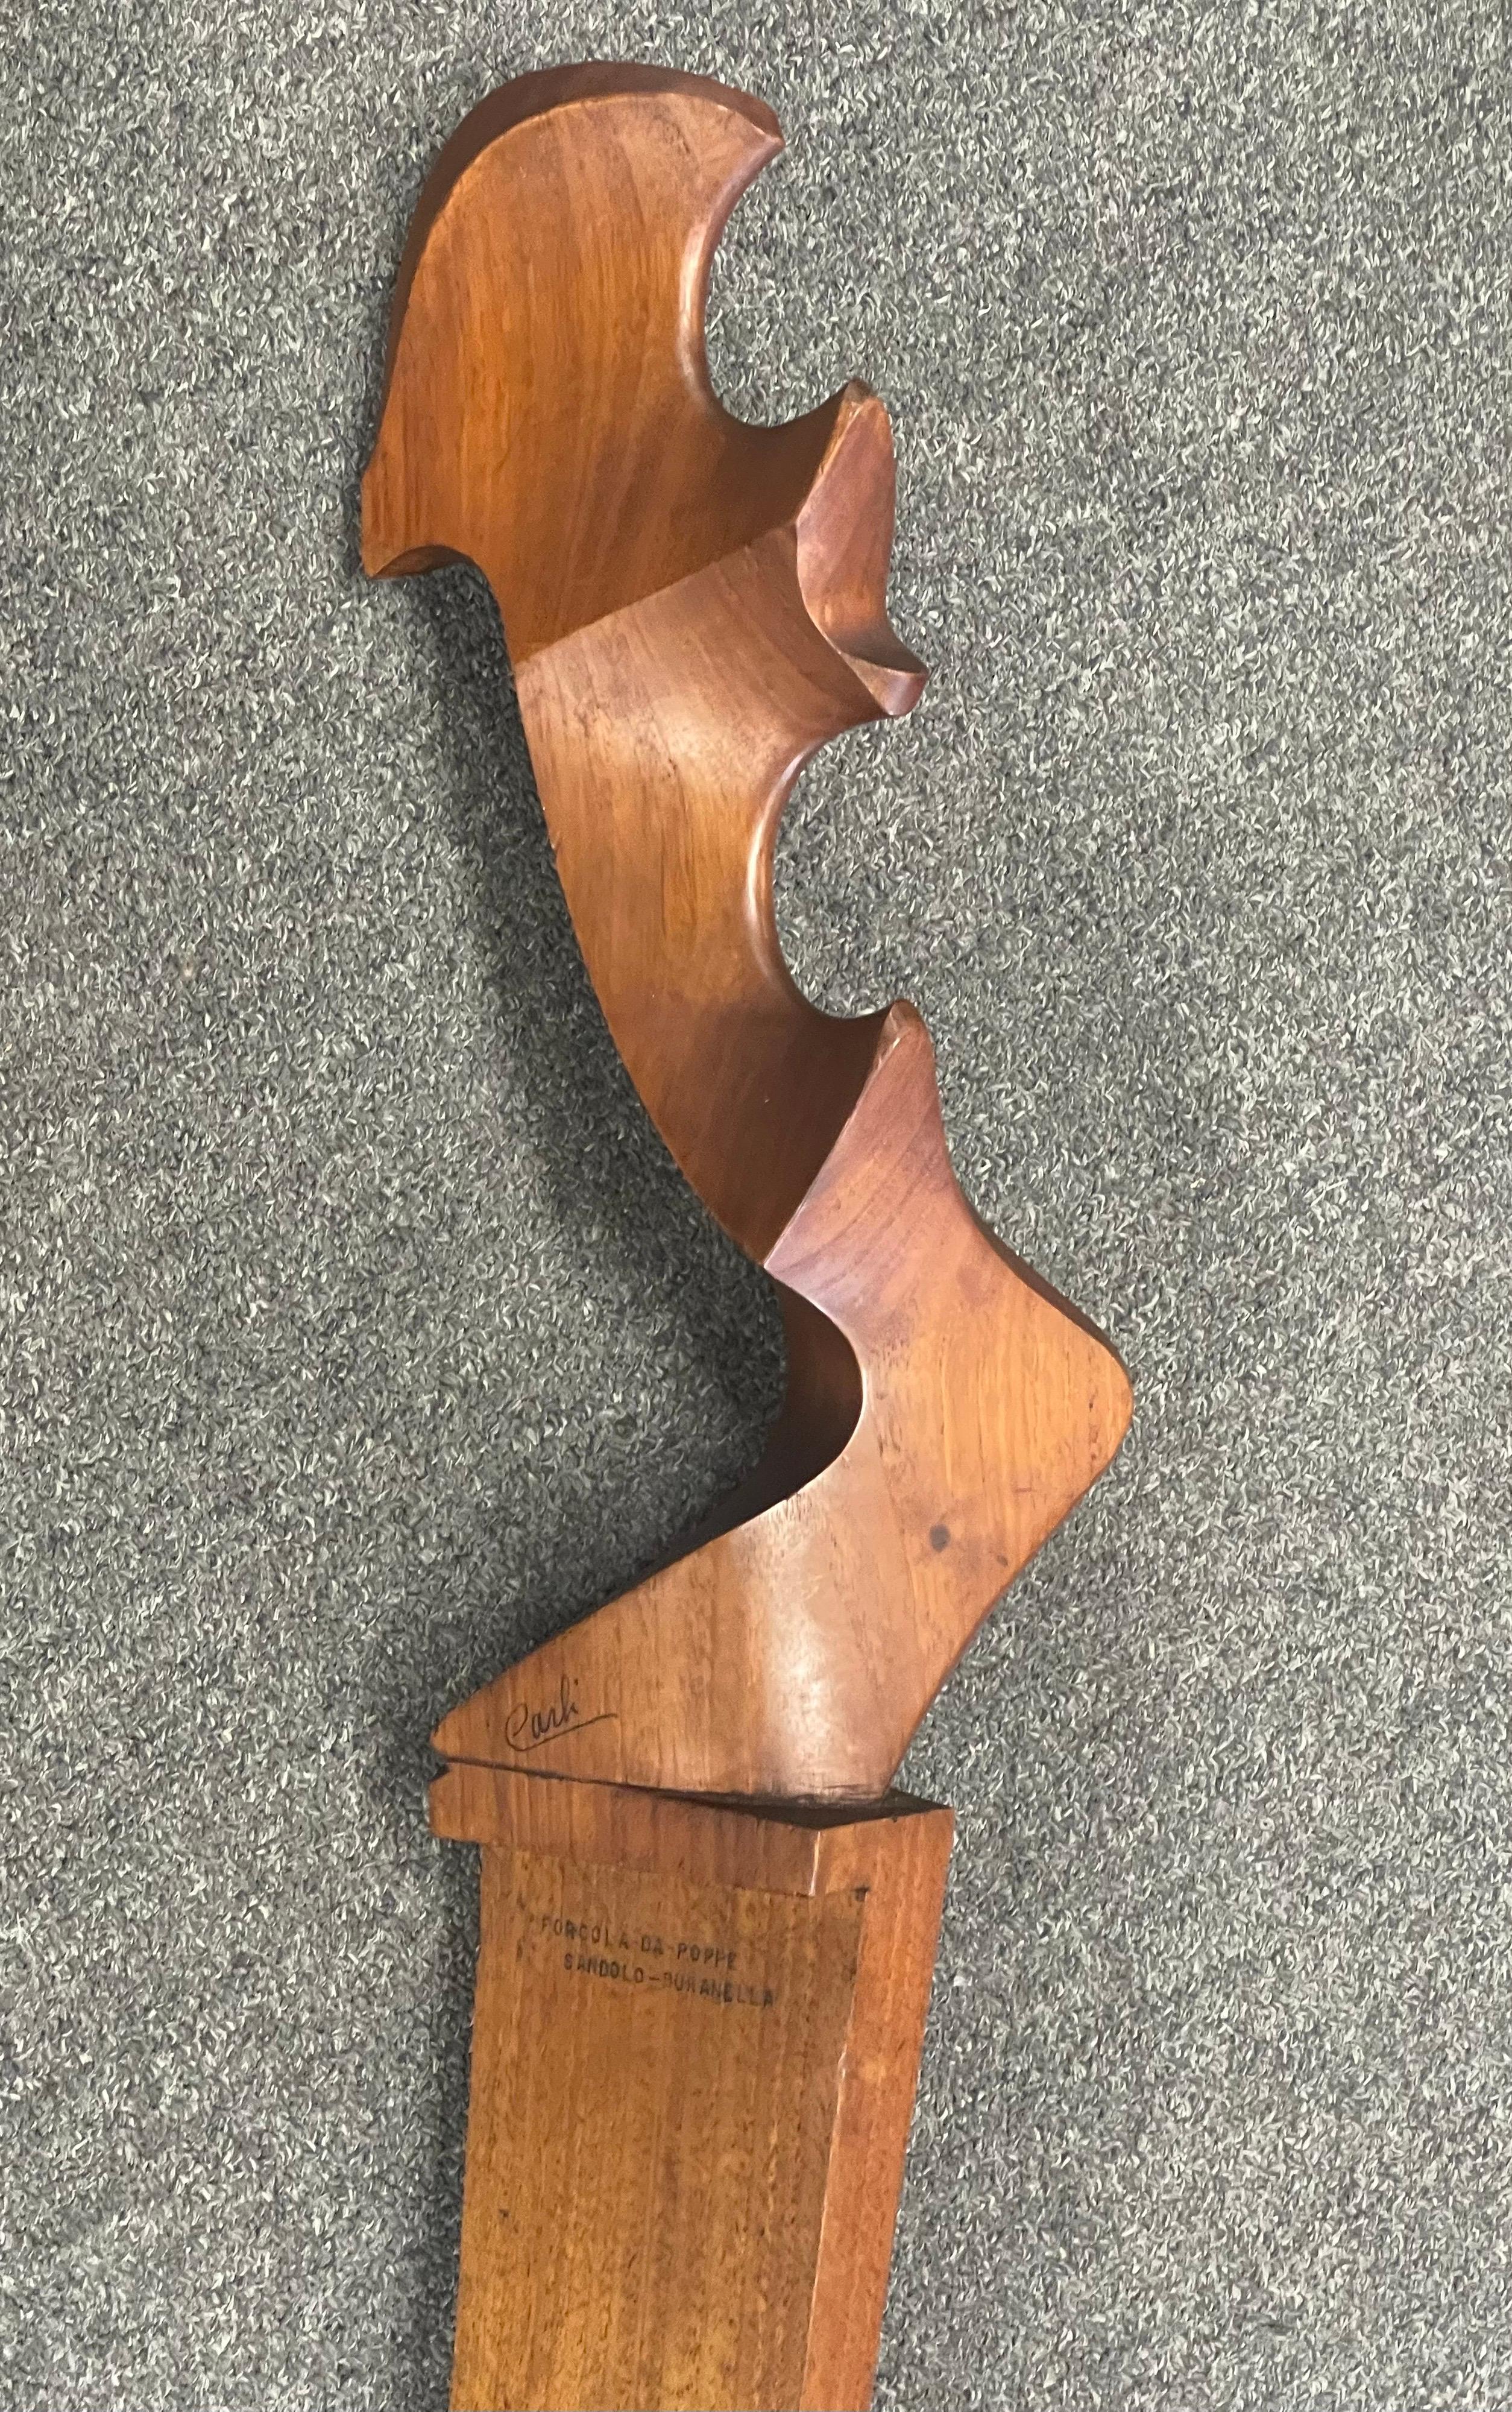 Venetian Abstract Solid Walnut Forcola Sculpture by Giuseppe Carli For Sale 1